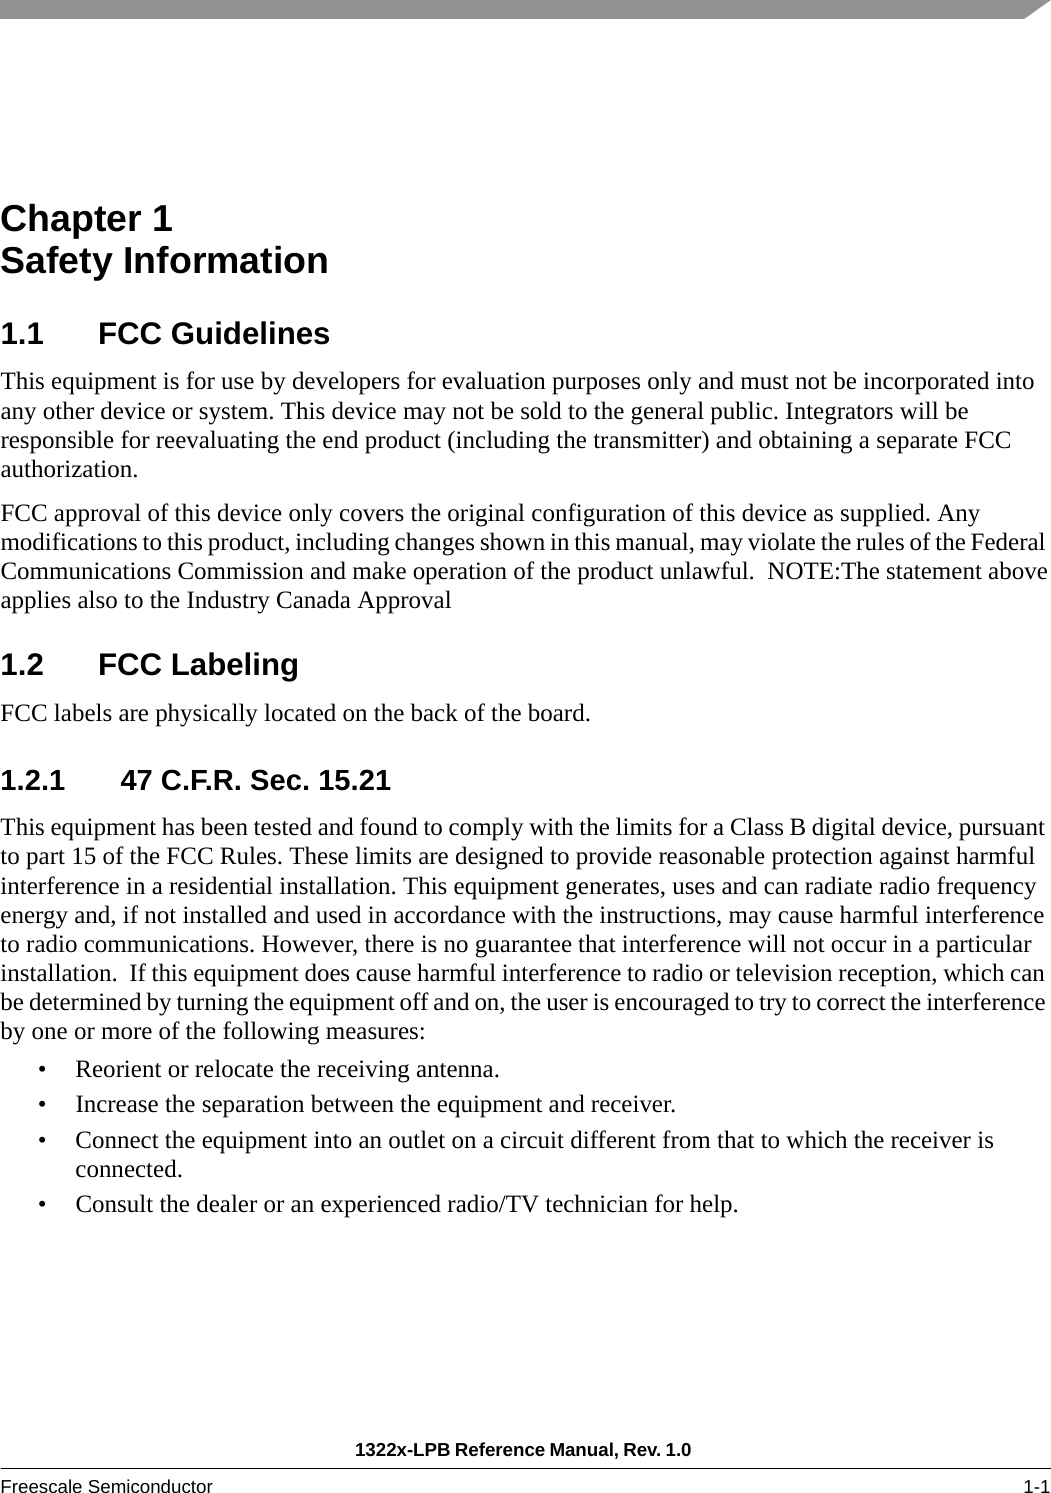 1322x-LPB Reference Manual, Rev. 1.0 Freescale Semiconductor 1-1Chapter 1  Safety Information1.1 FCC GuidelinesThis equipment is for use by developers for evaluation purposes only and must not be incorporated into any other device or system. This device may not be sold to the general public. Integrators will be responsible for reevaluating the end product (including the transmitter) and obtaining a separate FCC authorization.FCC approval of this device only covers the original configuration of this device as supplied. Any modifications to this product, including changes shown in this manual, may violate the rules of the Federal Communications Commission and make operation of the product unlawful.  NOTE:The statement aboveapplies also to the Industry Canada Approval 1.2 FCC LabelingFCC labels are physically located on the back of the board.1.2.1 47 C.F.R. Sec. 15.21This equipment has been tested and found to comply with the limits for a Class B digital device, pursuant to part 15 of the FCC Rules. These limits are designed to provide reasonable protection against harmful interference in a residential installation. This equipment generates, uses and can radiate radio frequency energy and, if not installed and used in accordance with the instructions, may cause harmful interference to radio communications. However, there is no guarantee that interference will not occur in a particular installation.  If this equipment does cause harmful interference to radio or television reception, which can be determined by turning the equipment off and on, the user is encouraged to try to correct the interference by one or more of the following measures:• Reorient or relocate the receiving antenna.• Increase the separation between the equipment and receiver.• Connect the equipment into an outlet on a circuit different from that to which the receiver is connected.• Consult the dealer or an experienced radio/TV technician for help.